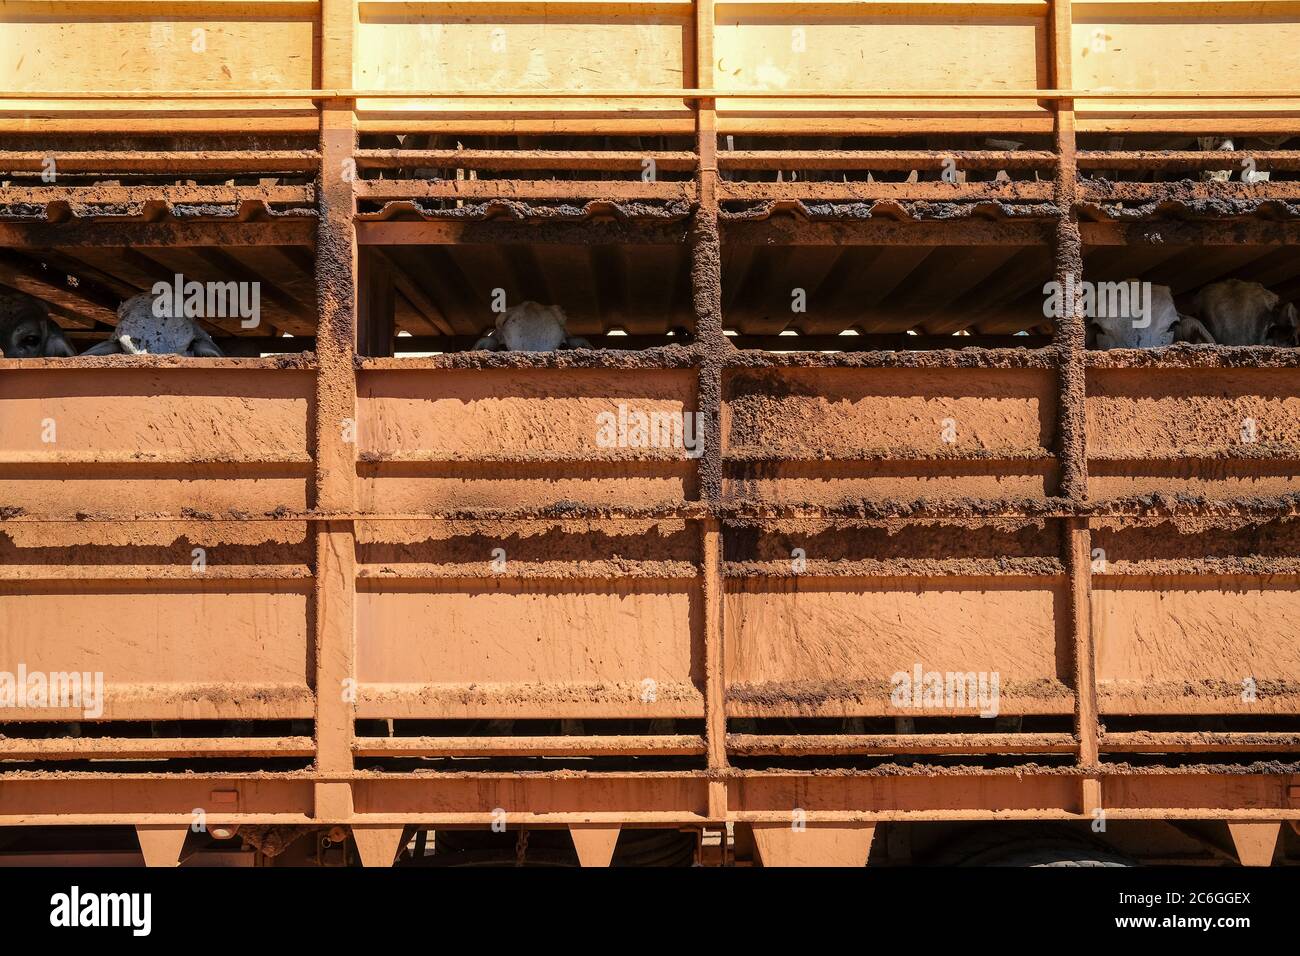 Detail of a Road Train truck transporting cattle parked on the side of the road in the Northern Territory of Australia. Stock Photo